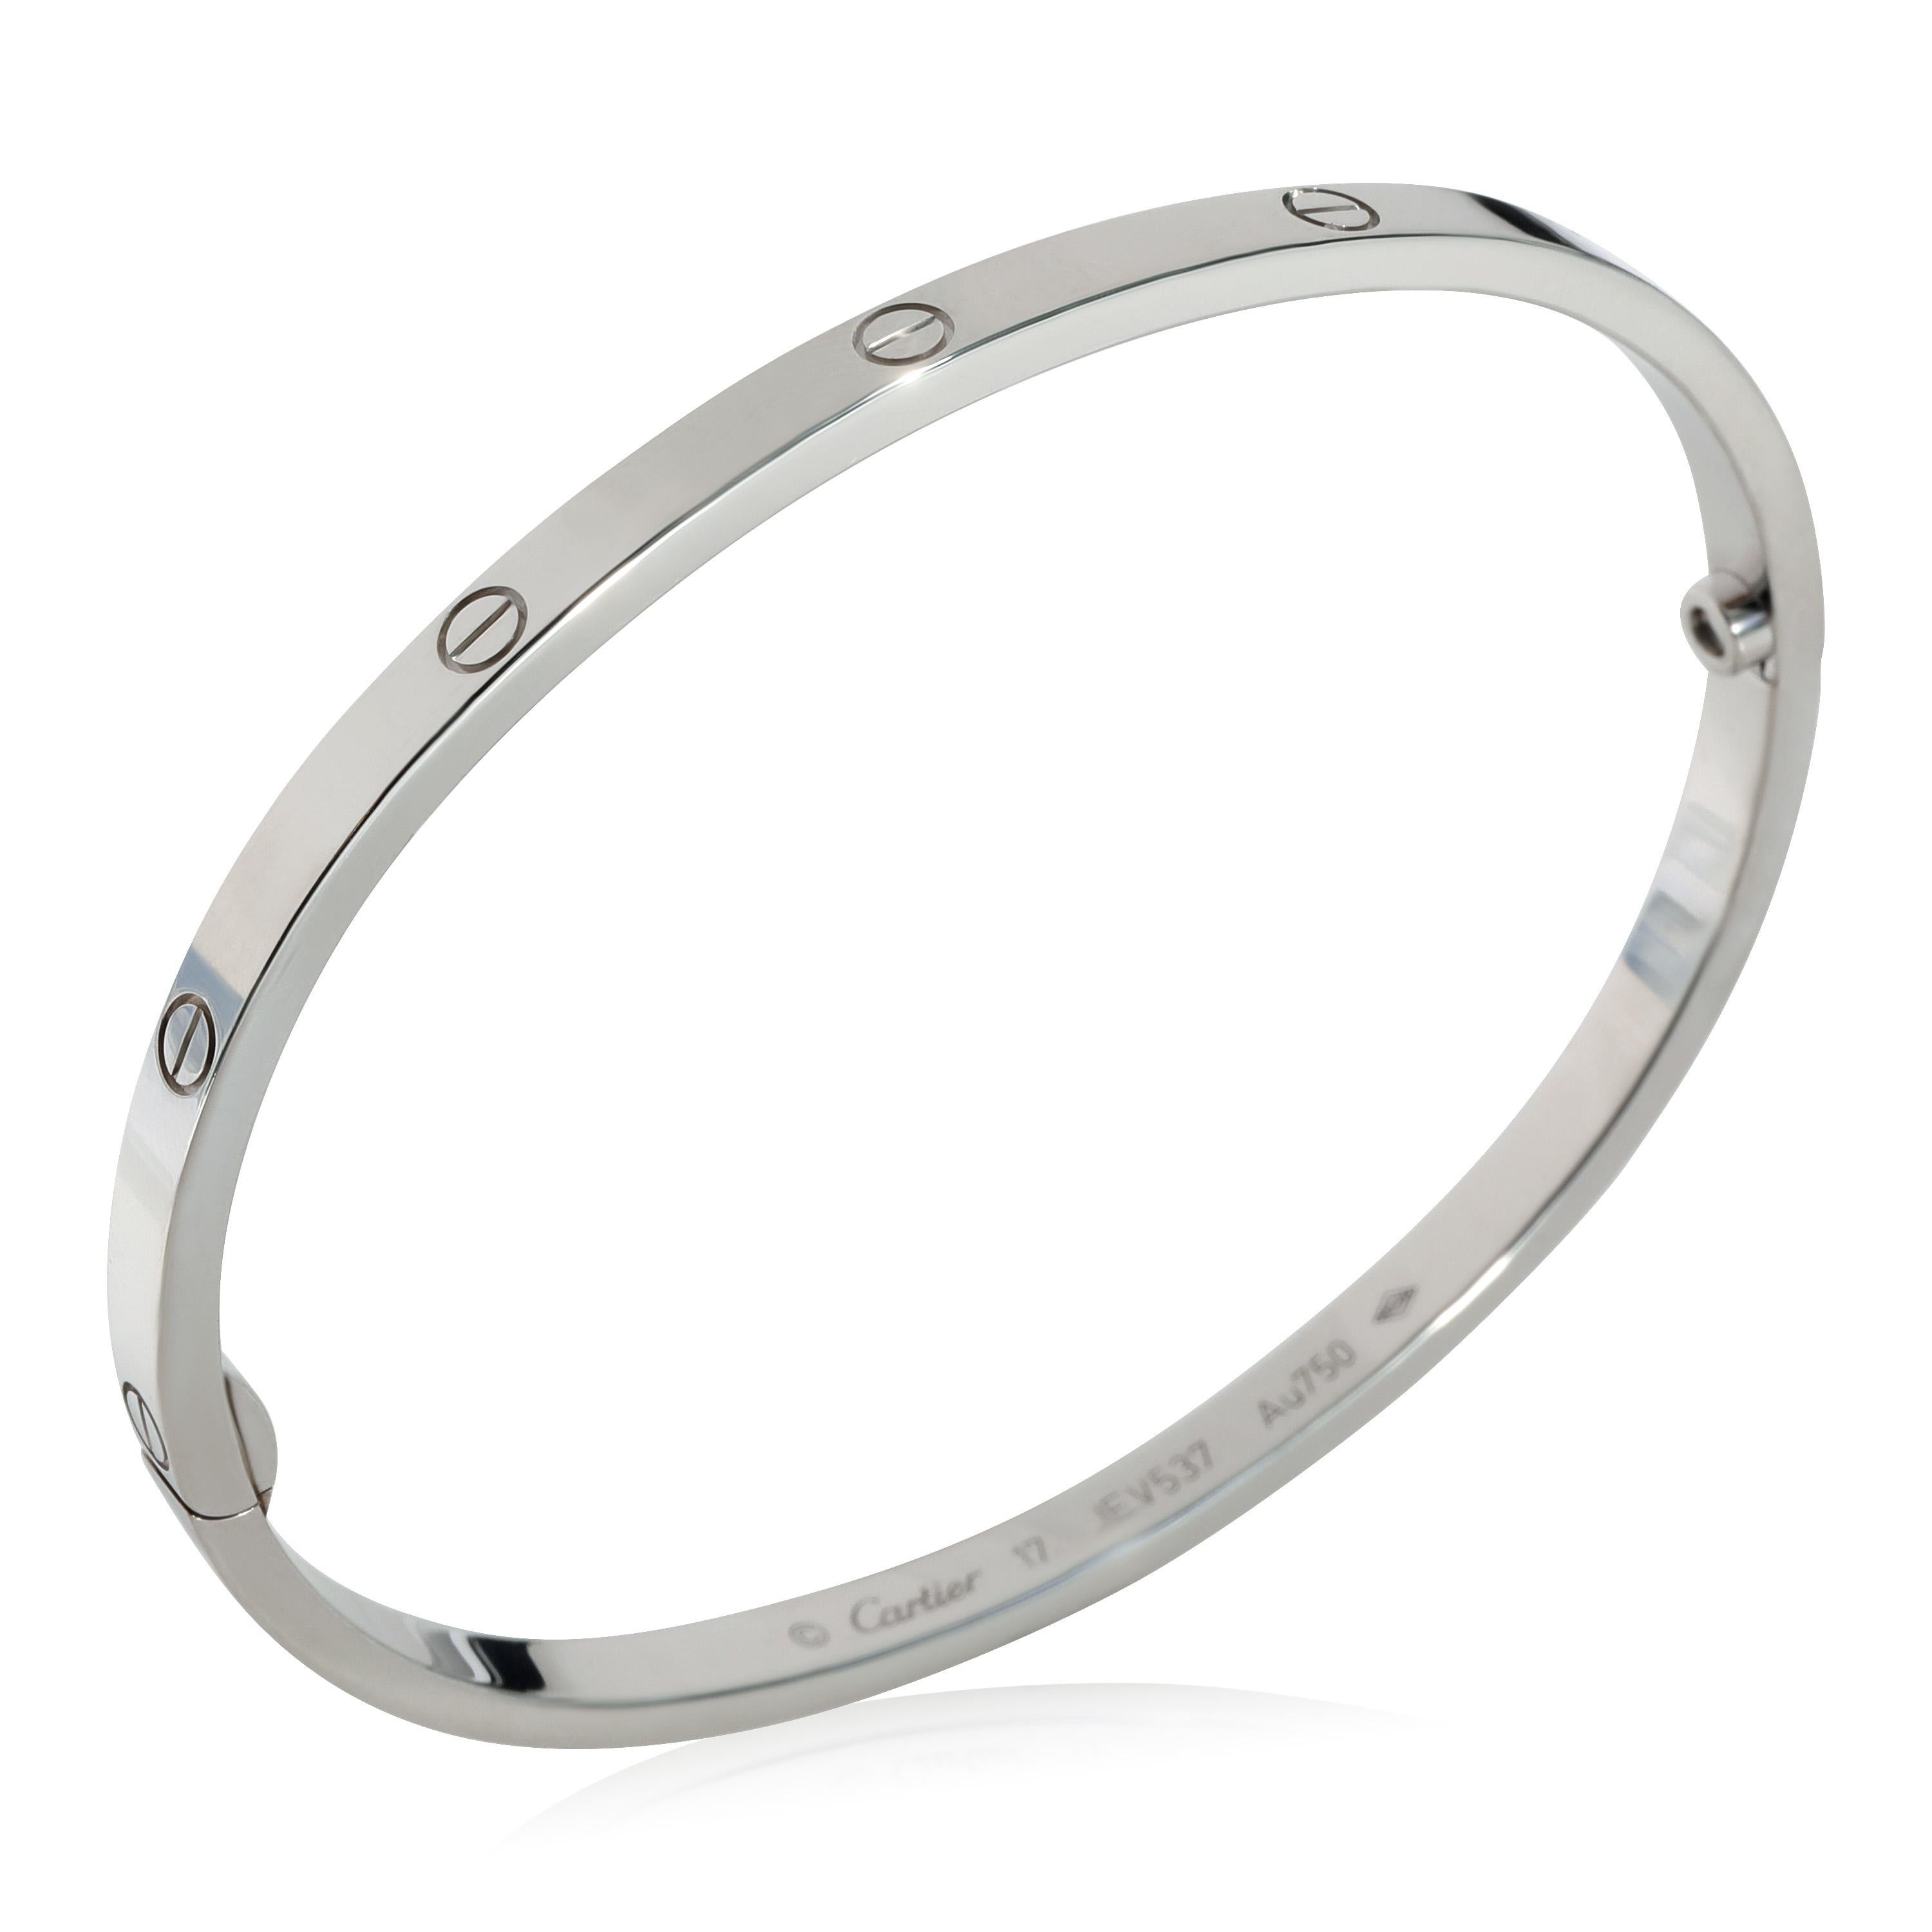 Cartier Love Bracelet, Small Model in 18k White Gold

PRIMARY DETAILS
SKU: 129806
Listing Title: Cartier Love Bracelet, Small Model in 18k White Gold
Condition Description: Cartier's Love collection is the epitome of iconic, from the recognizable